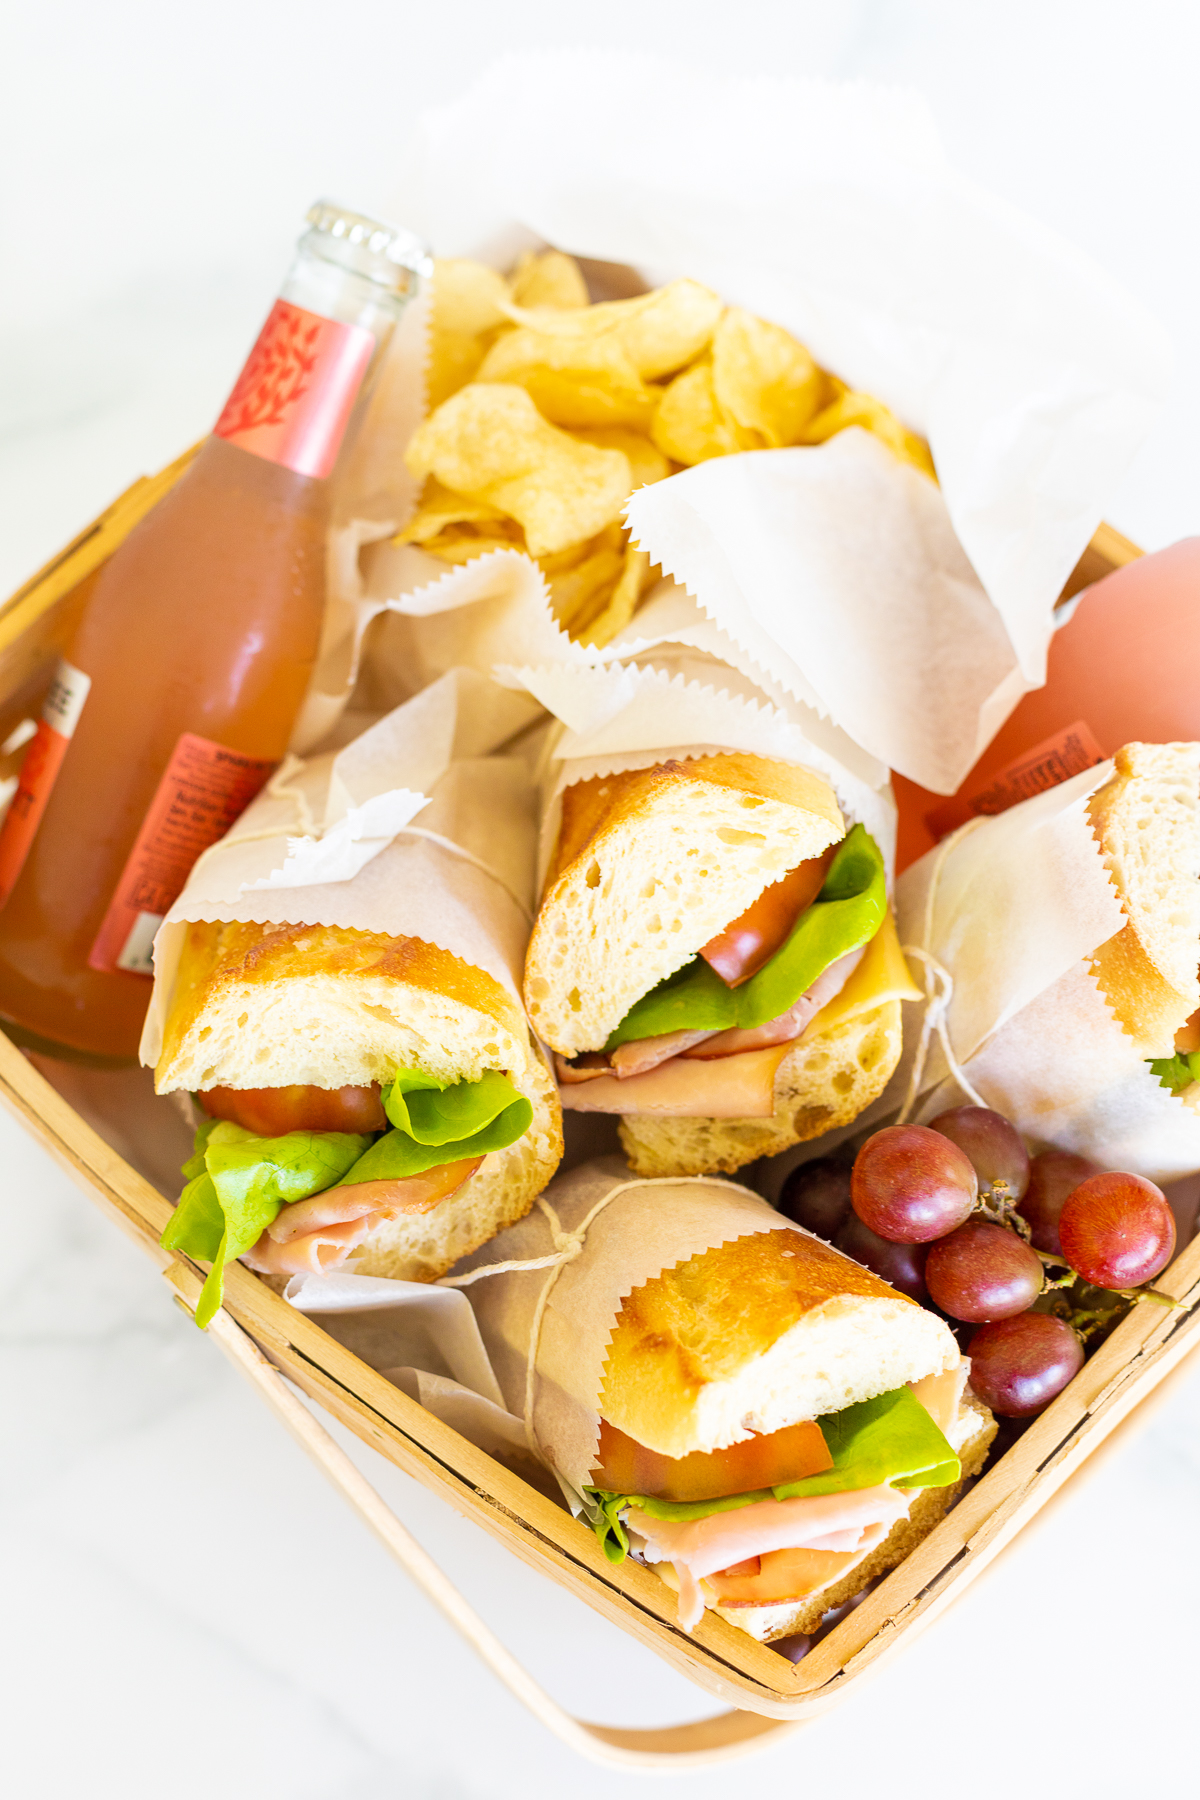 A picnic basket filled with sandwiches and grapes.